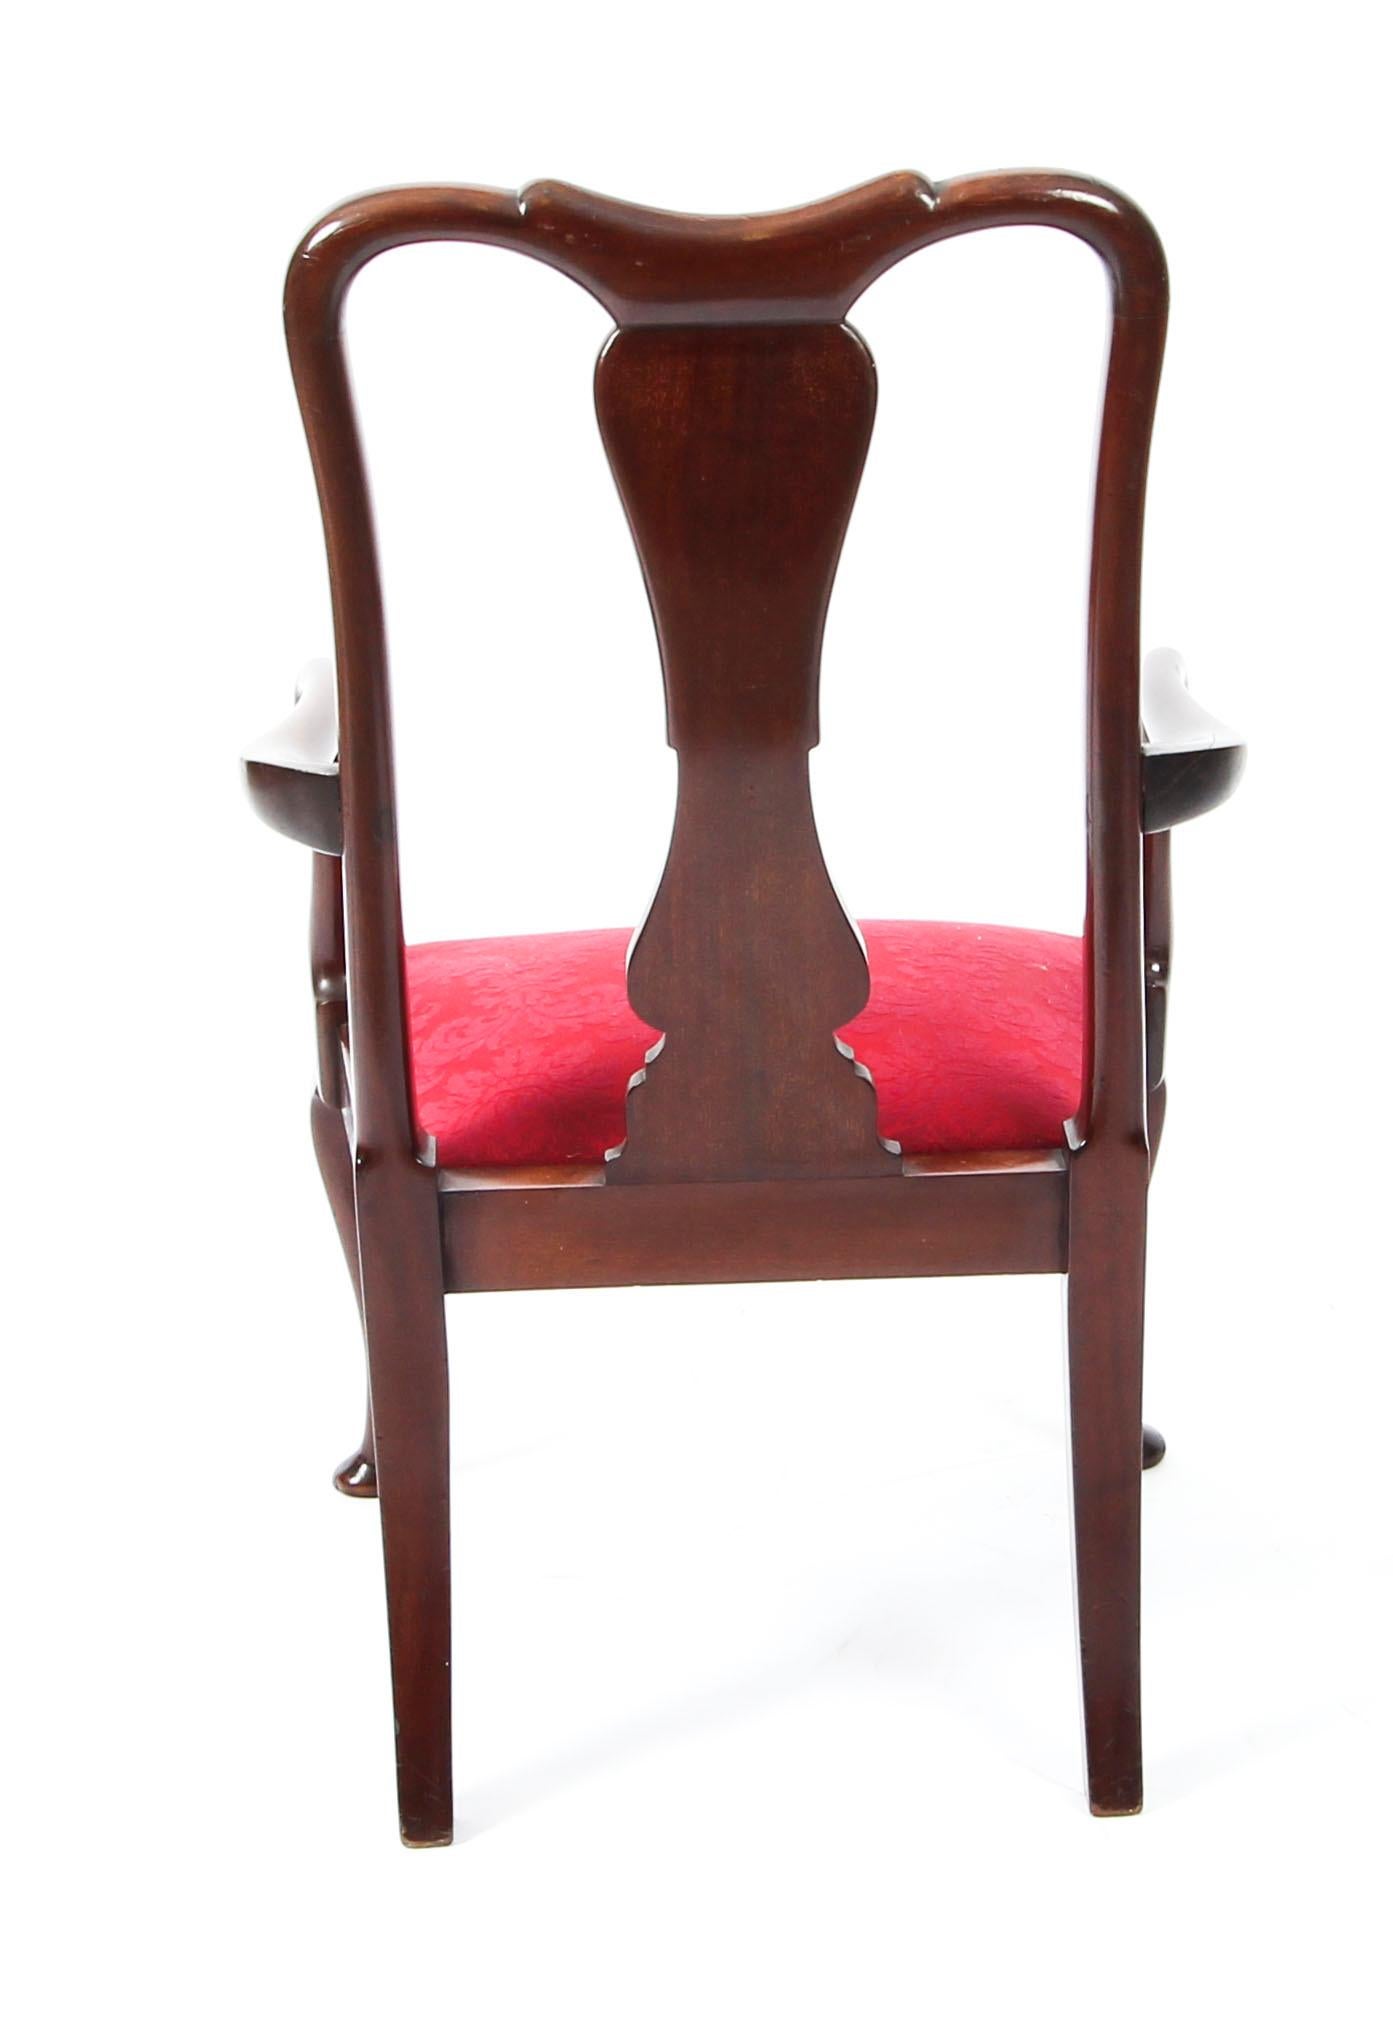 Early 20th Century Queen Anne Revival Mahogany Child's Chair For Sale 3